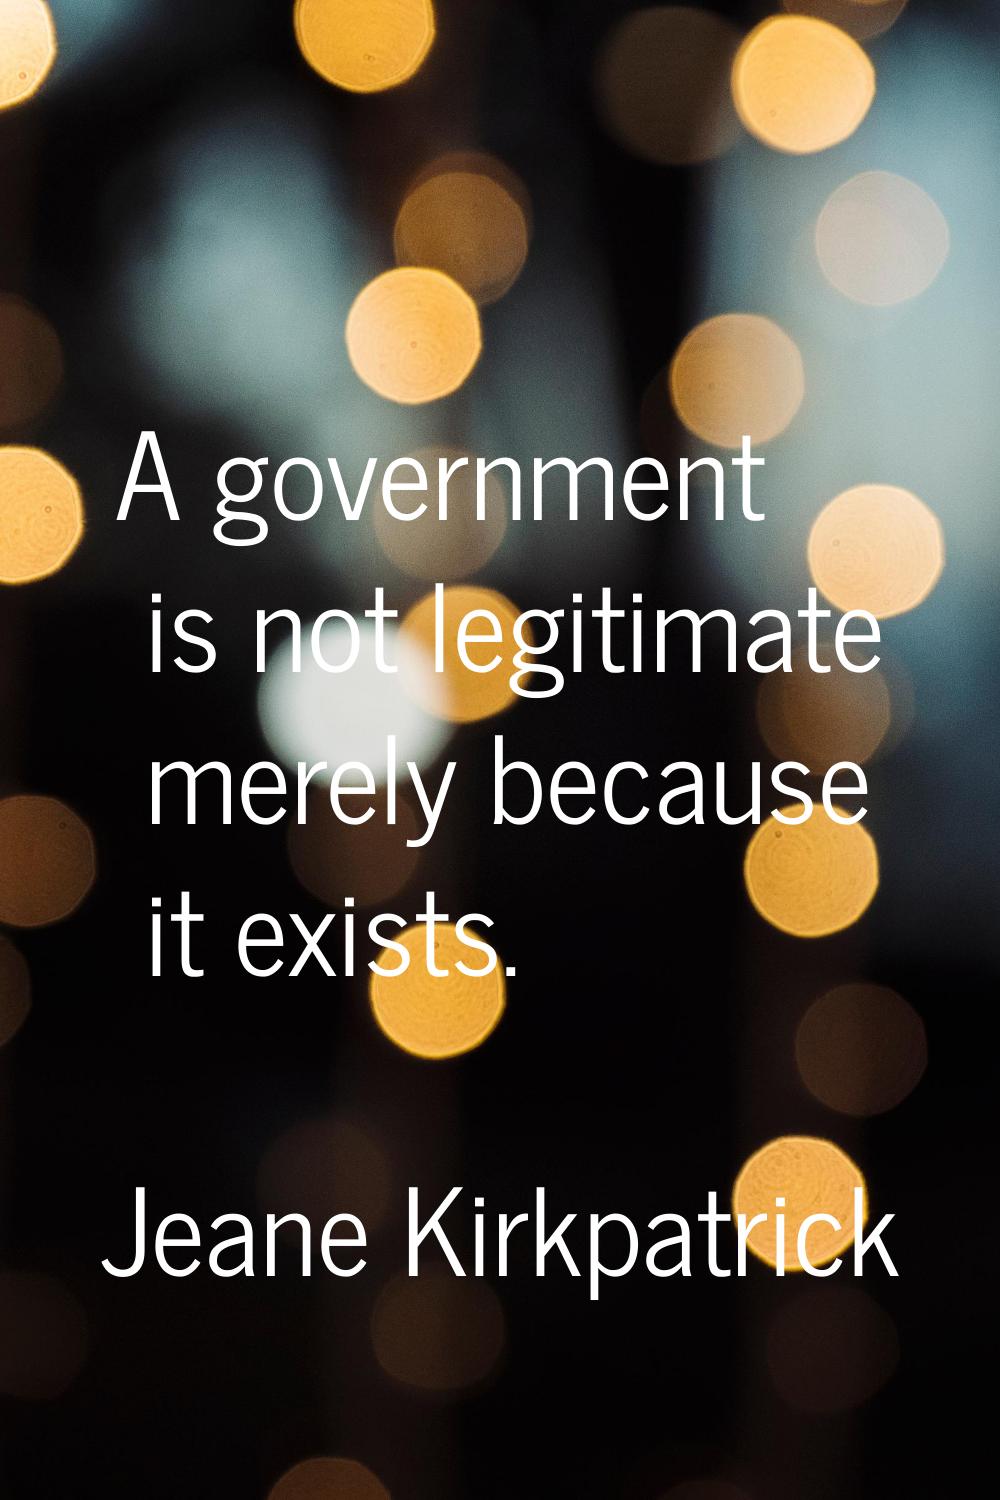 A government is not legitimate merely because it exists.